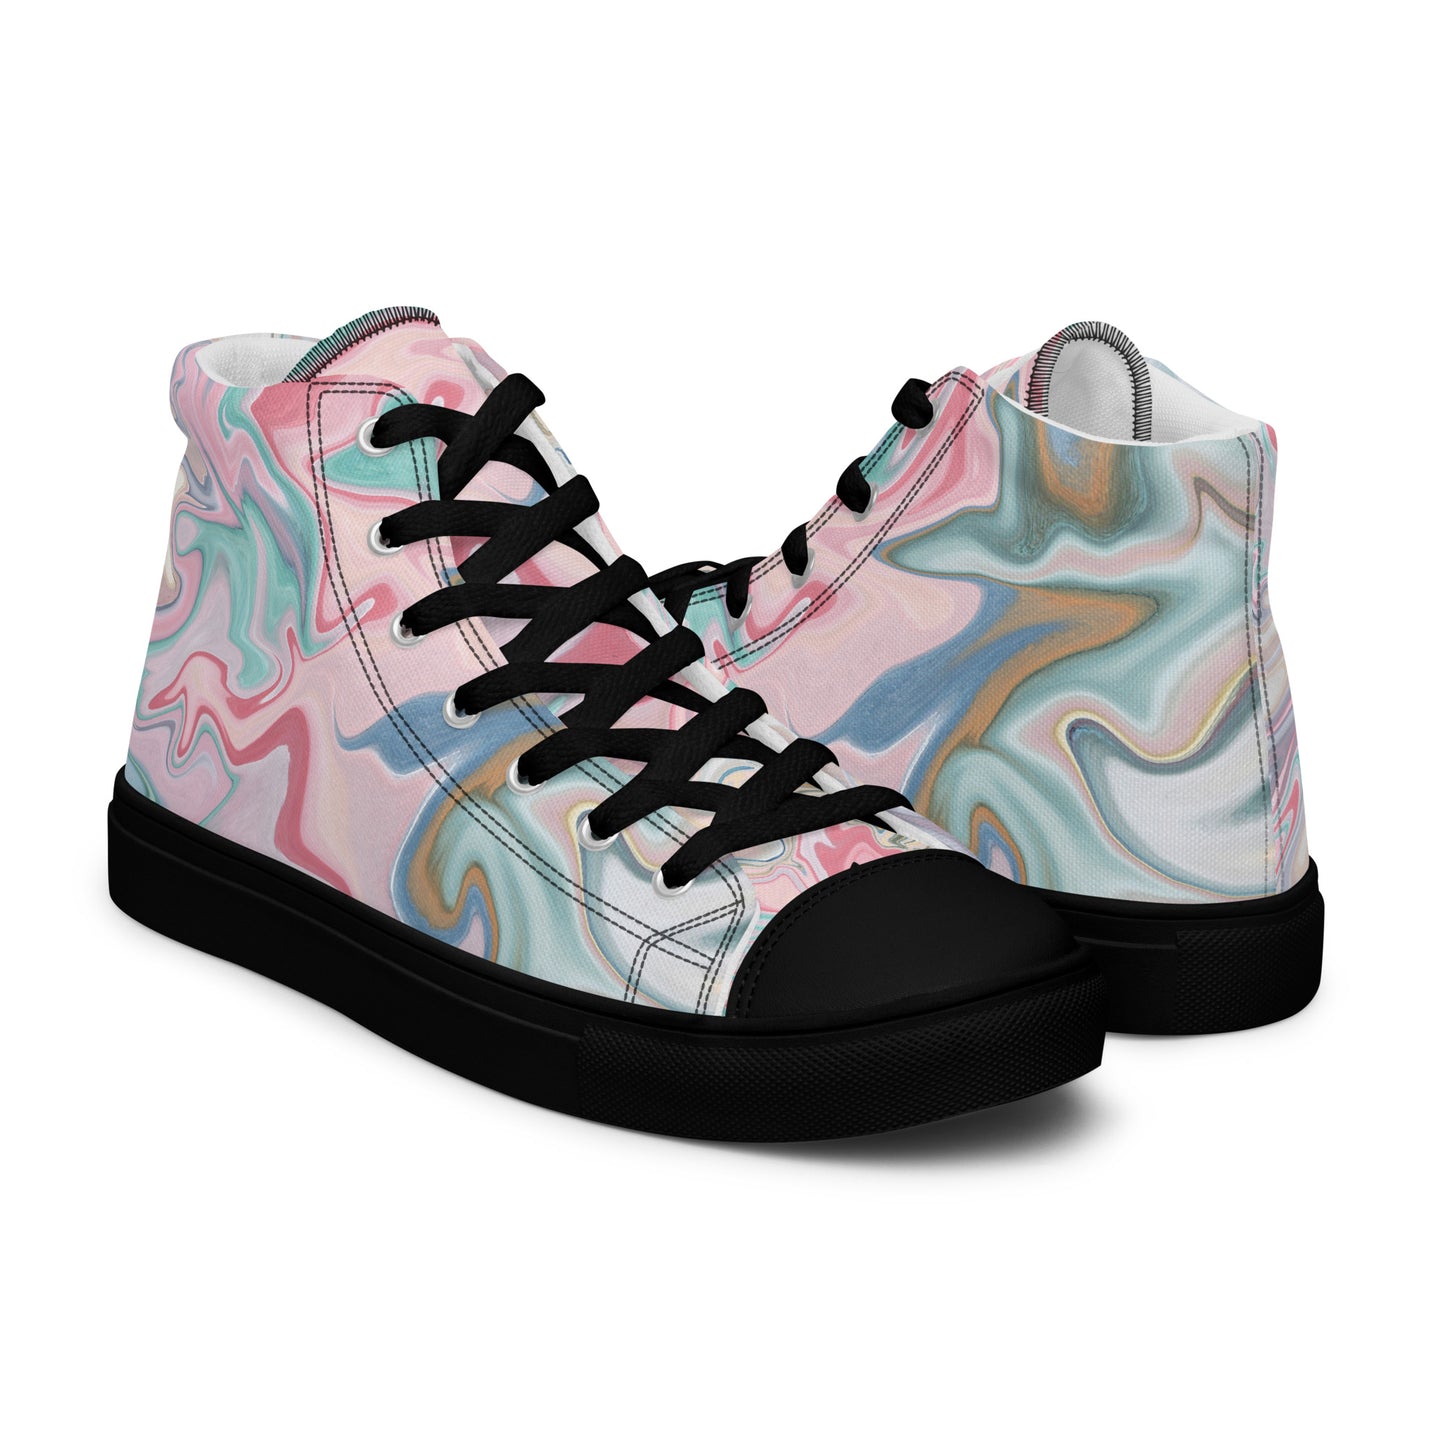 Women’s Ink Pond high top canvas shoes